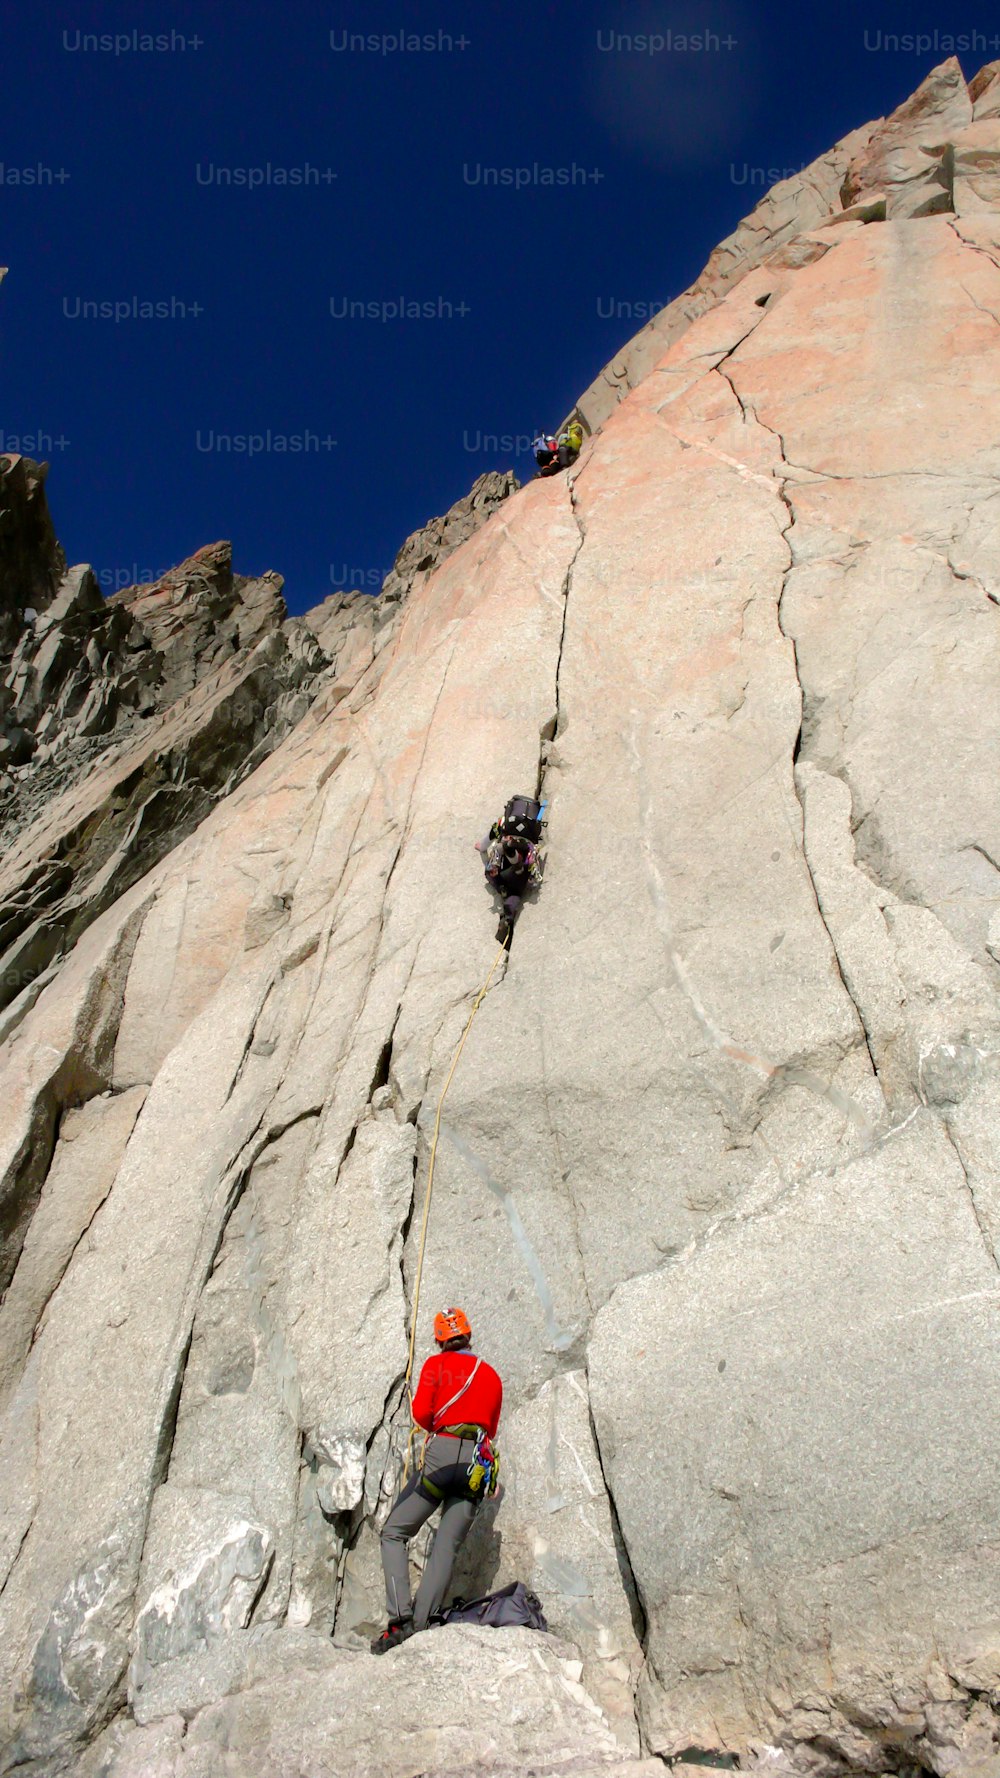 two rock climbers on a difficult route in a vertical granite wall in the French Alps  near Chamonix under a blue sky